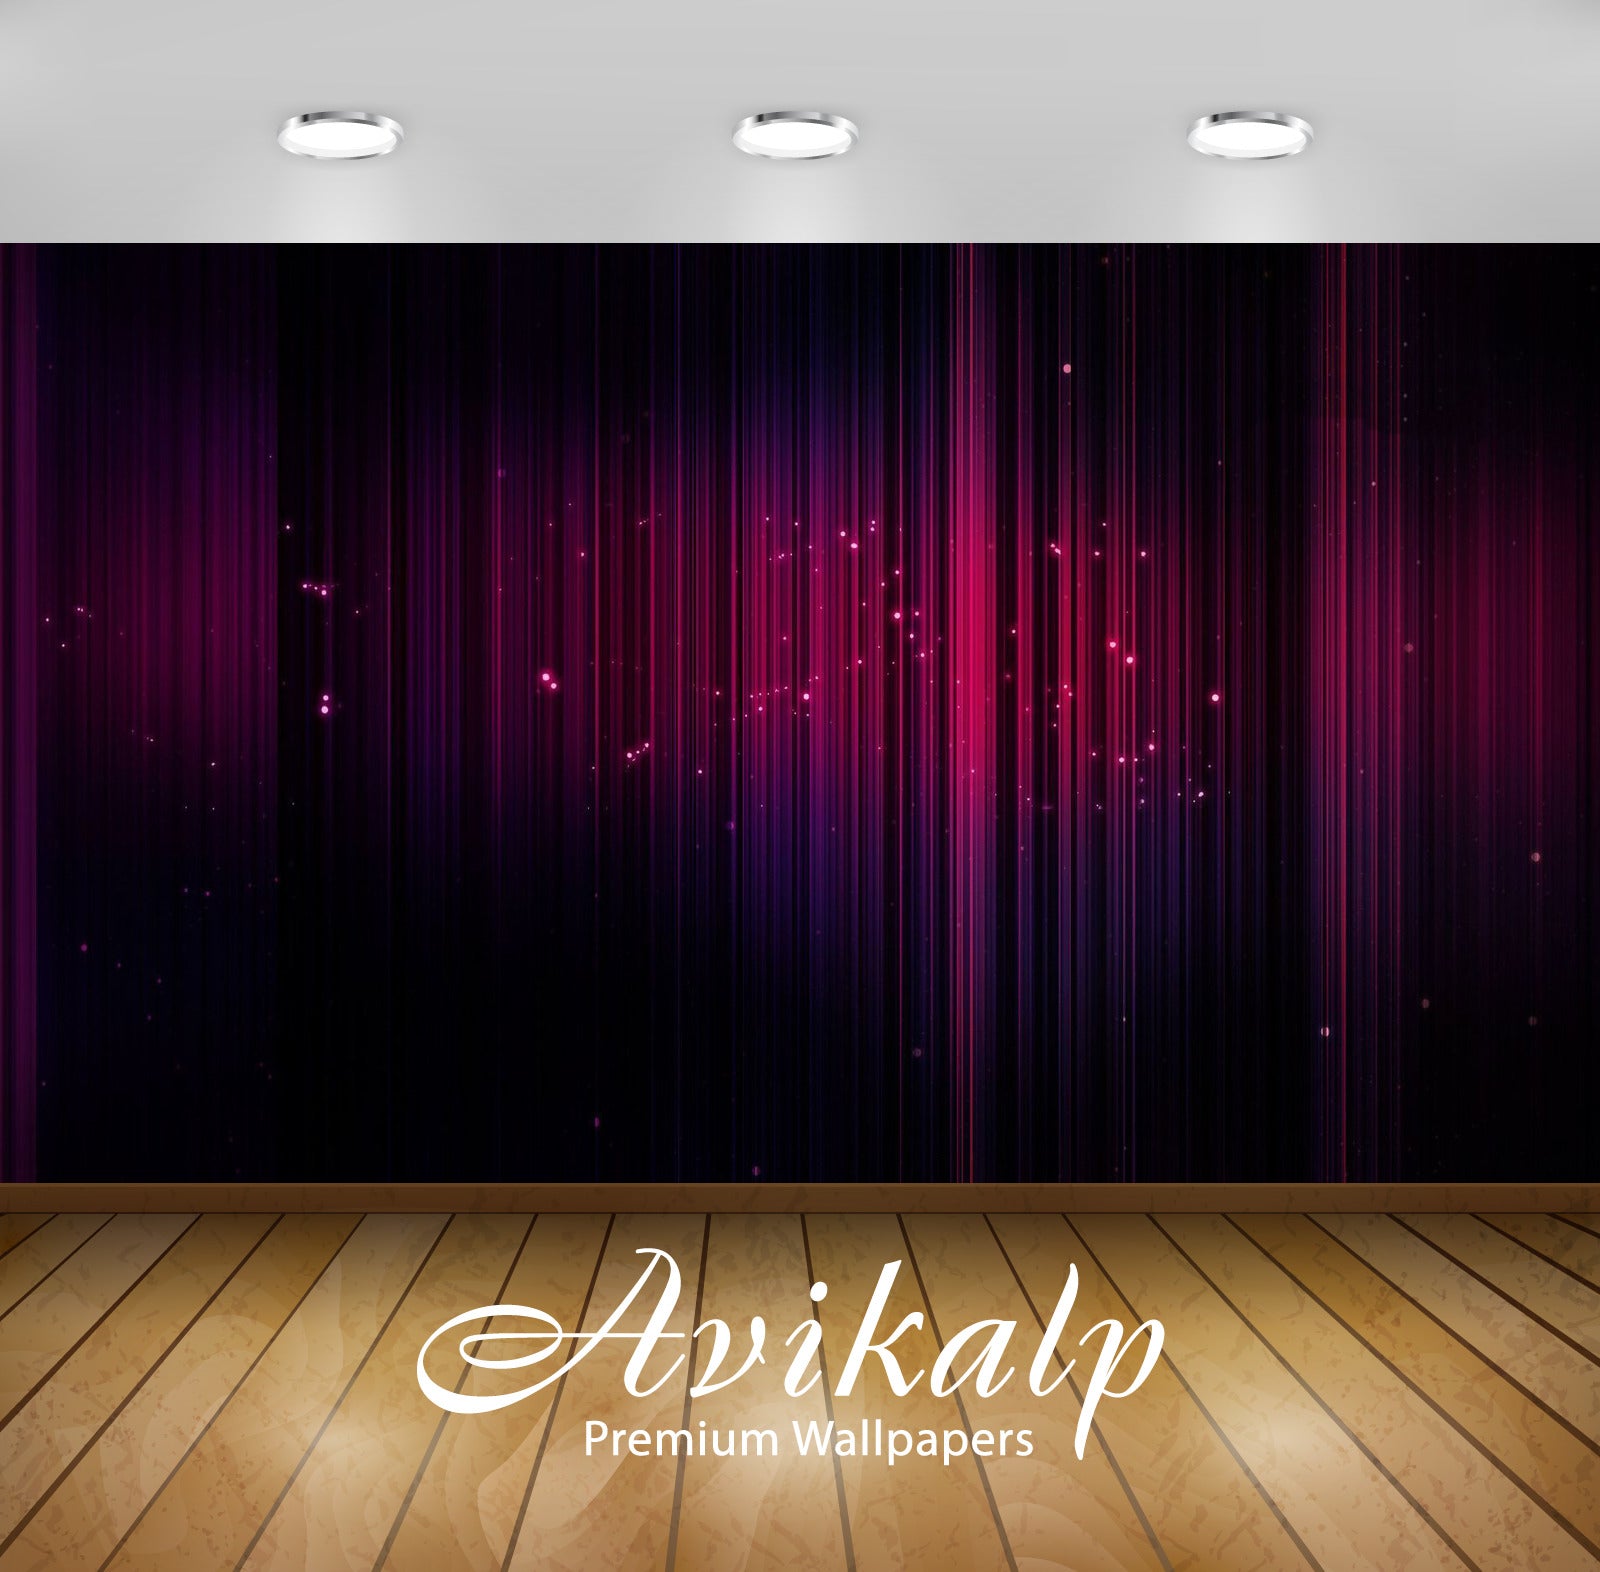 Avikalp Exclusive Awi4564 Pink Stripes And Glowing Circles Full HD Wallpapers for Living room, Hall,